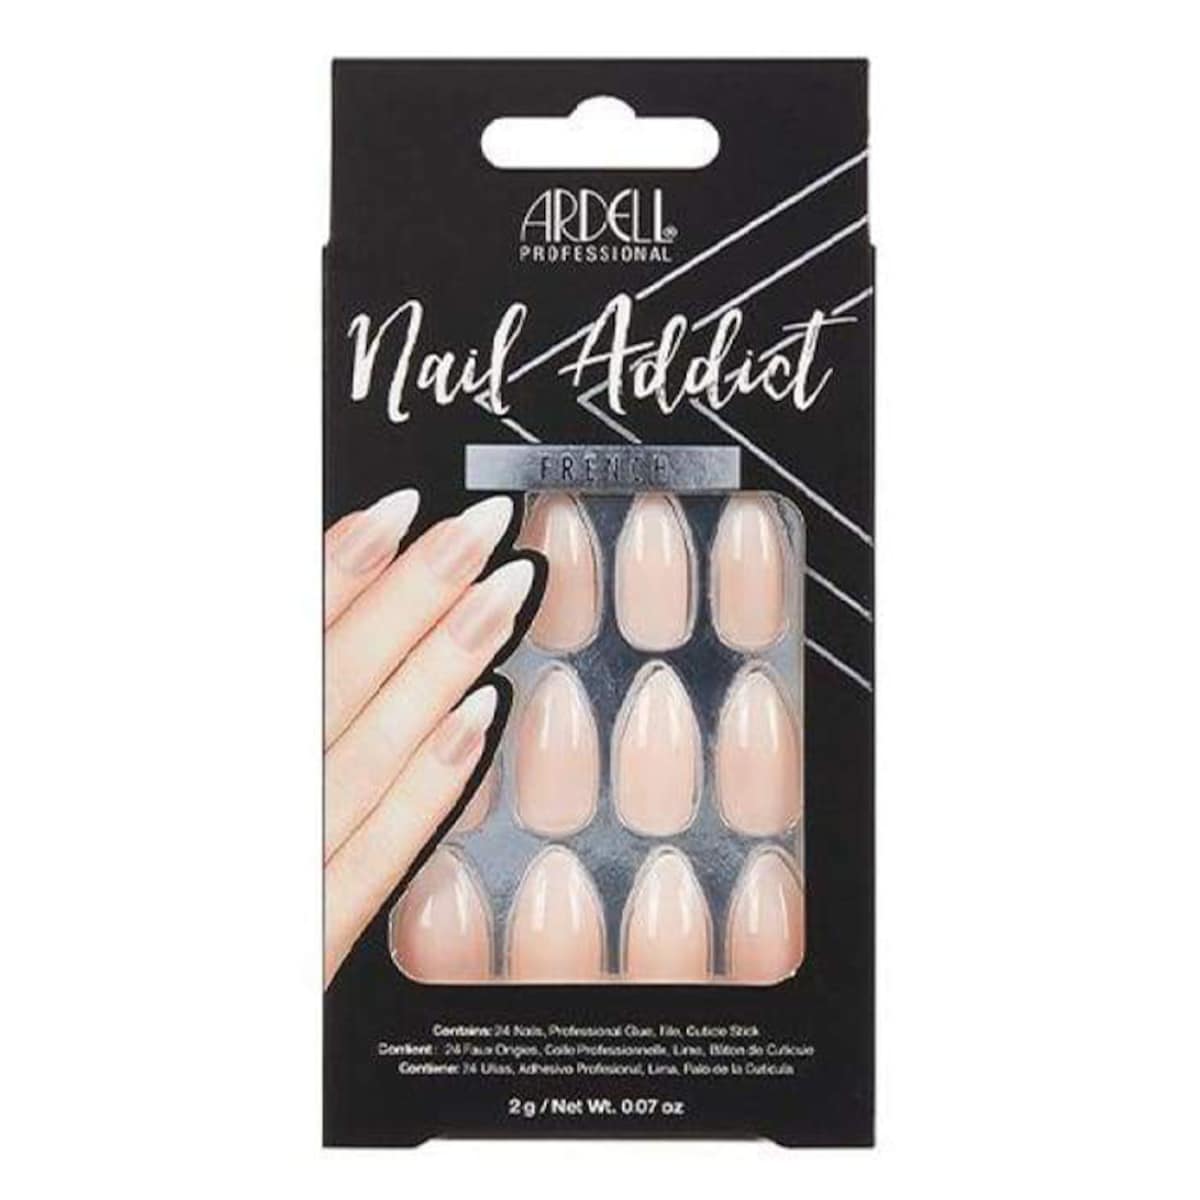 Ardell Nail Addict French Ombre Kit